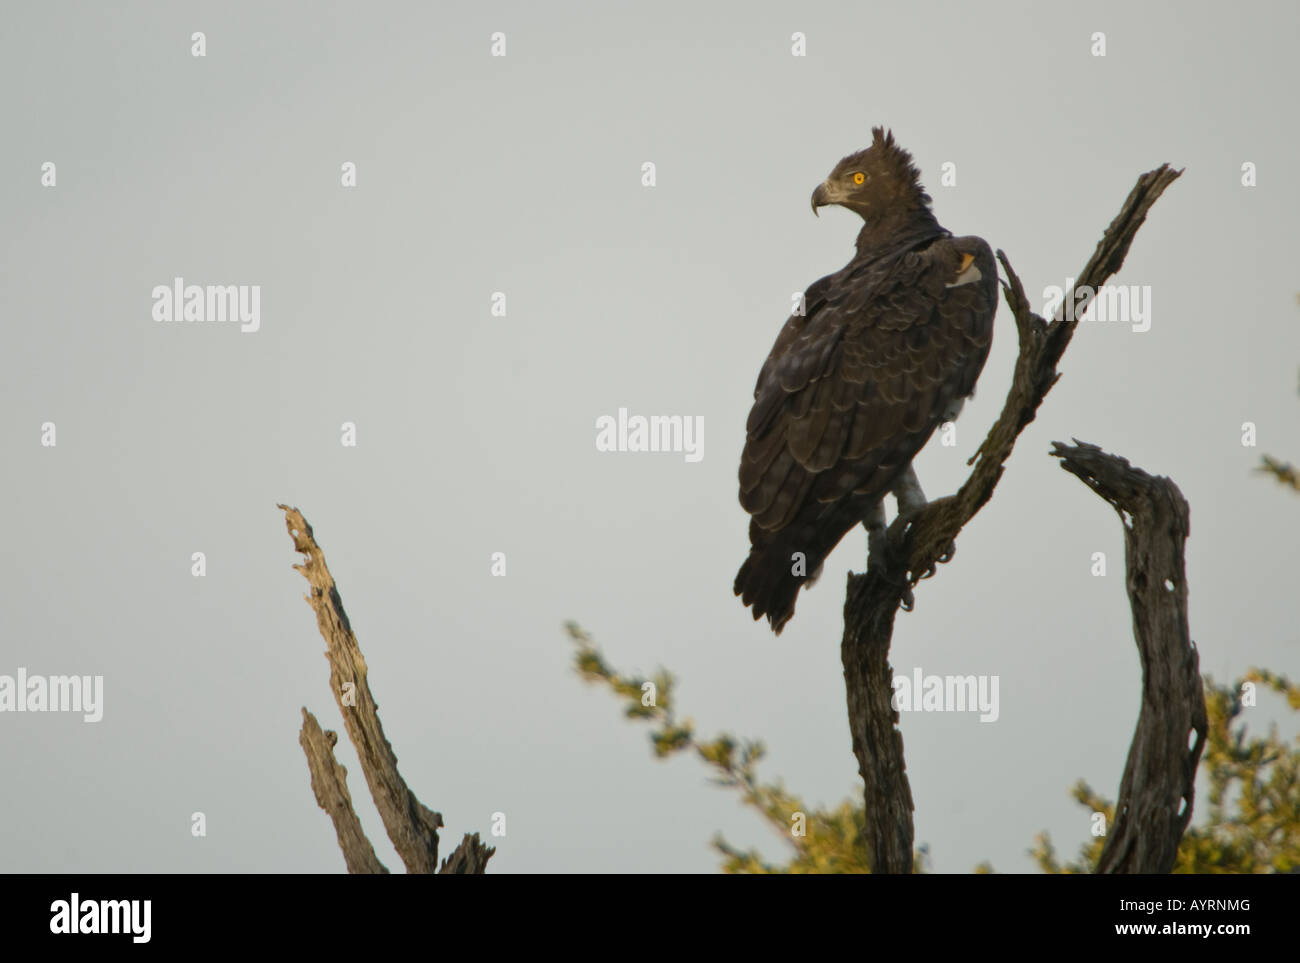 A crowned eagle perched on a branch and surveying the surroundings Stock Photo